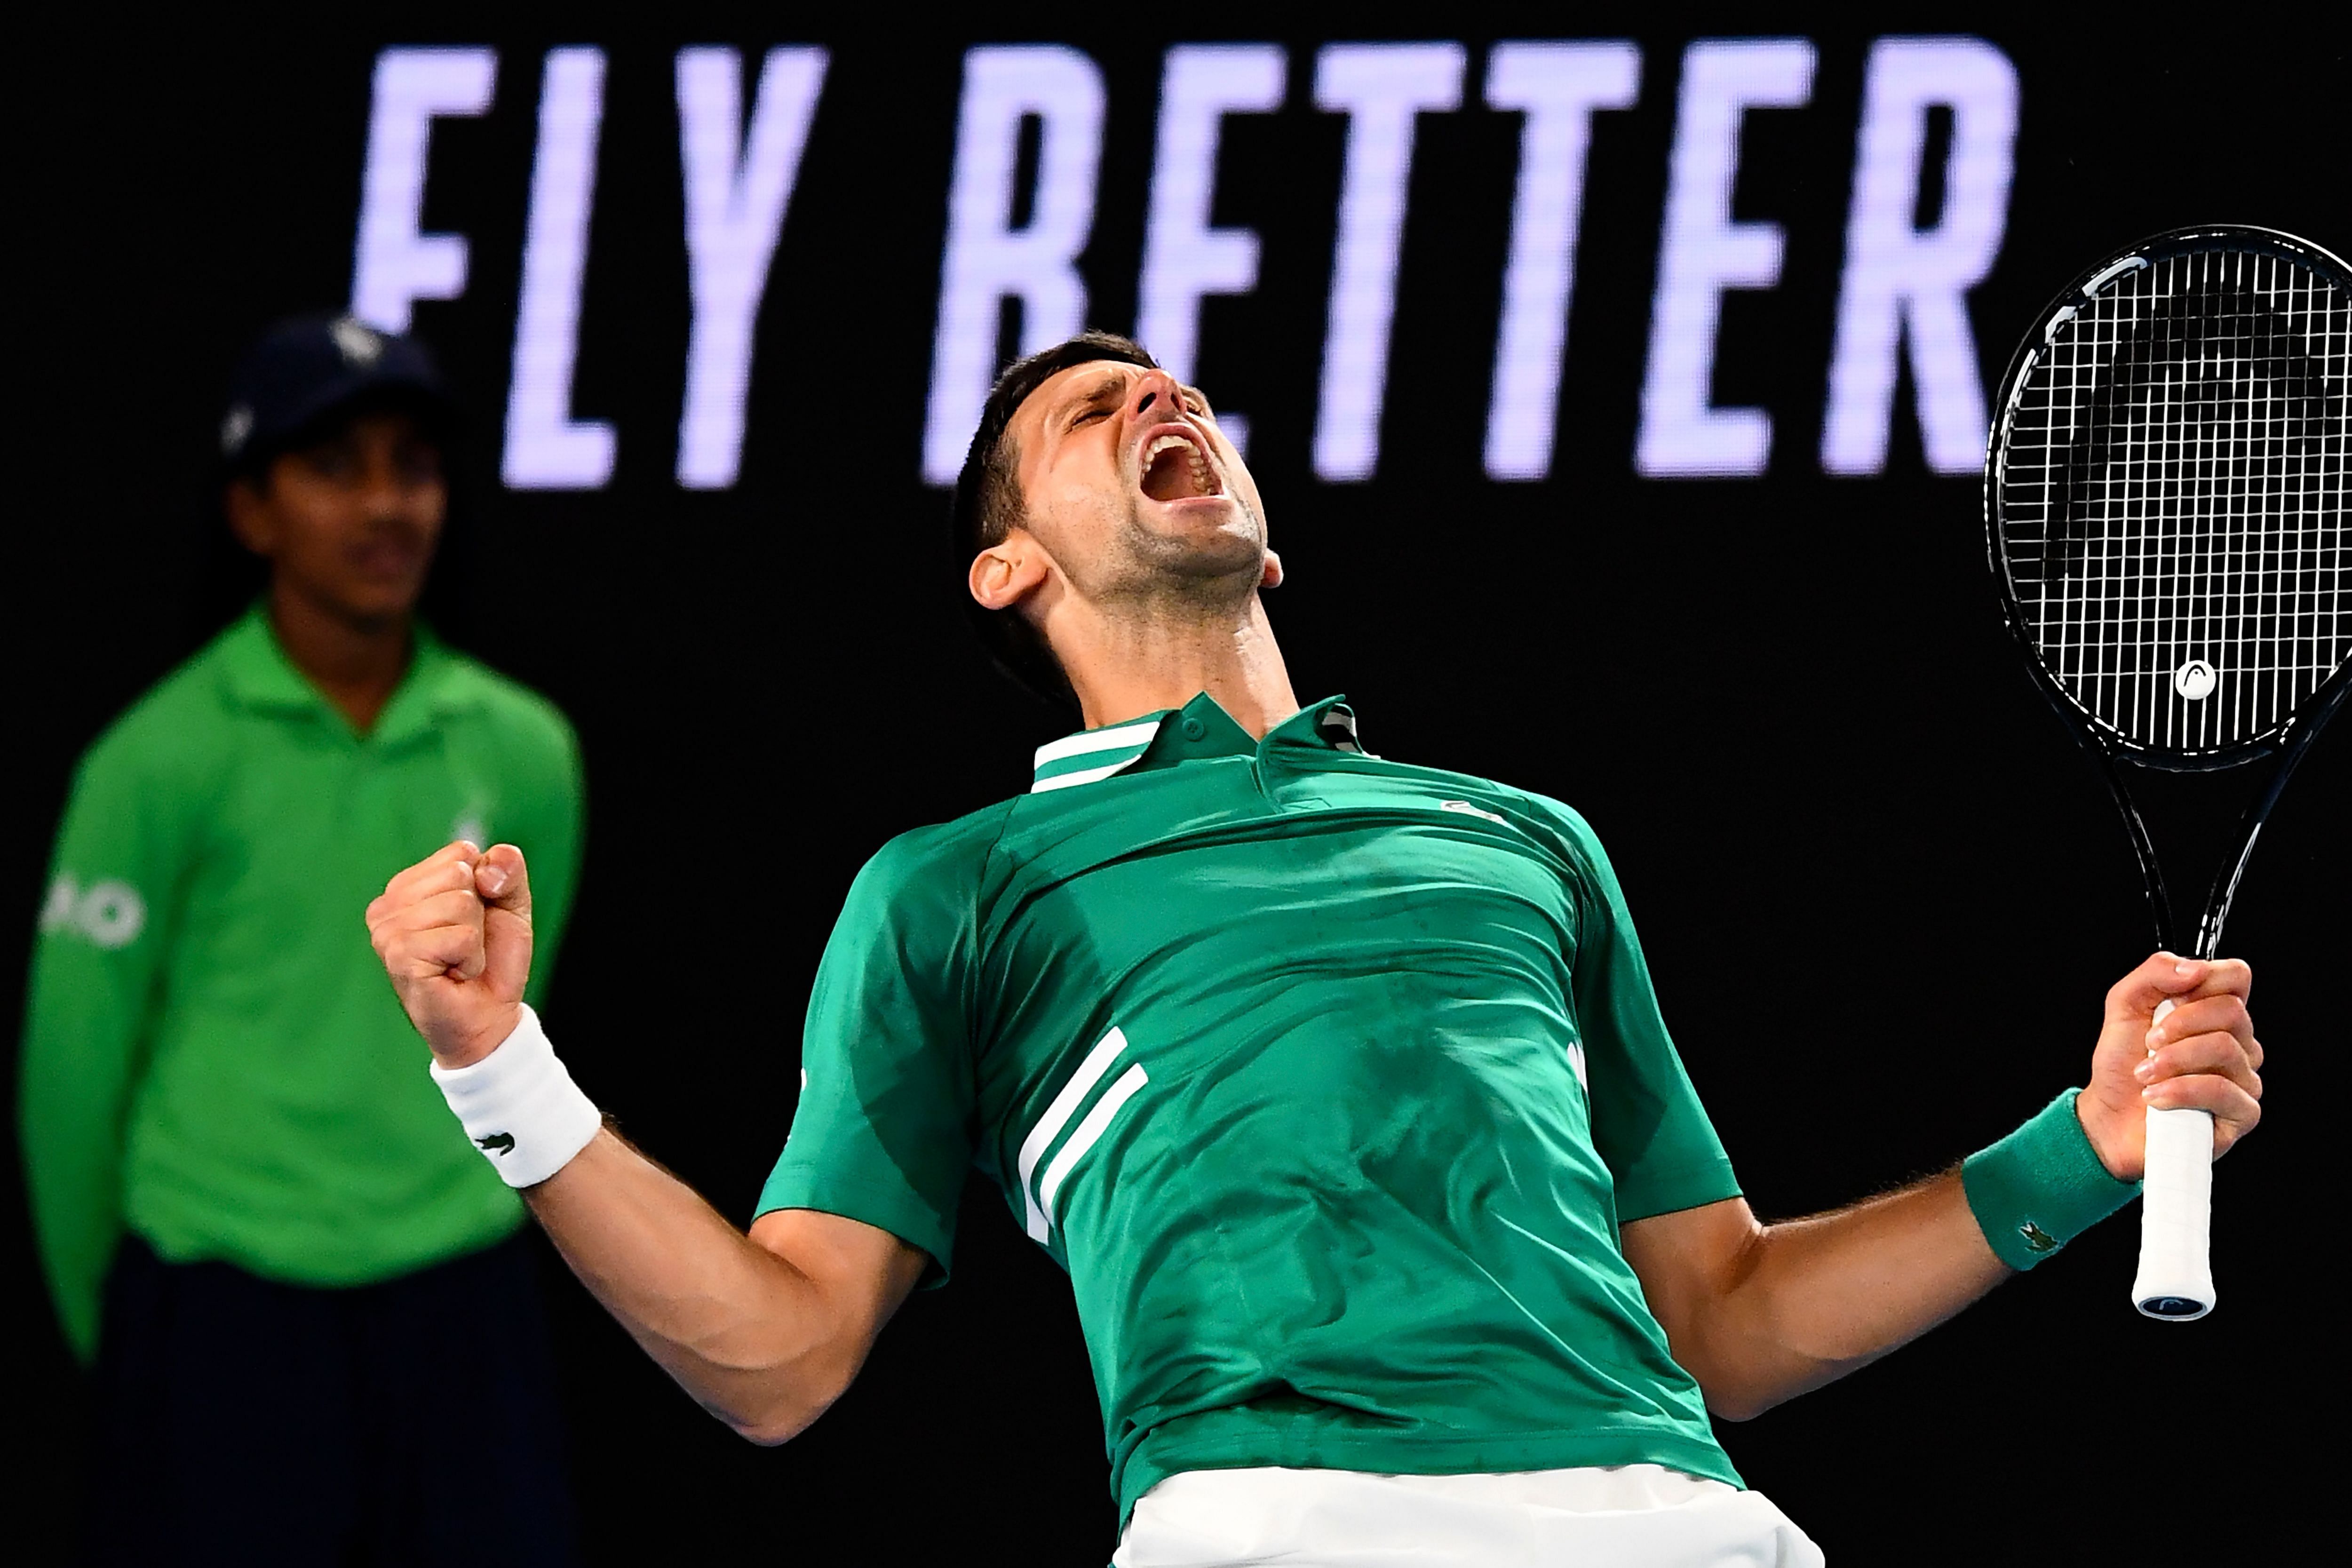 Serbia's Novak Djokovic celebrates after winning against Taylor Fritz of the US during their men's singles match on day five of the Australian Open. Credit: AFP Photo